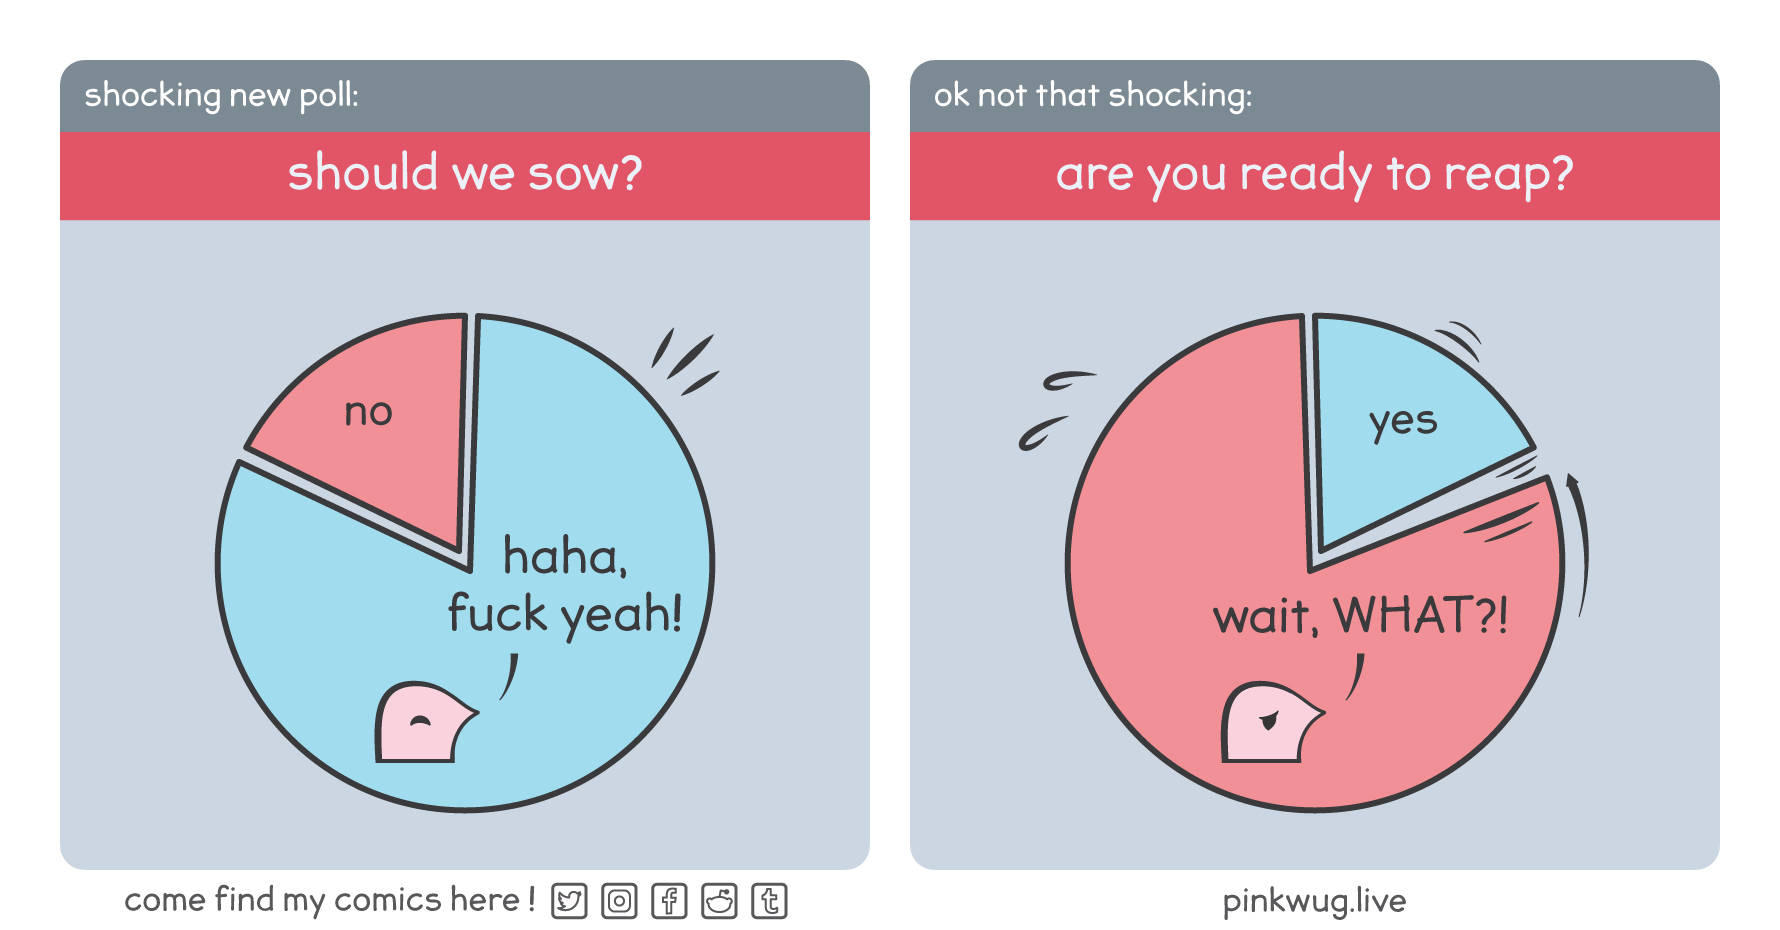 pinkwug comic: Panel 1:
Shocking new poll: "Should we sow?"
A small portion of the pie chart says "no", a big portion says "haha, fuck yeah!"

Panel 2:
ok not that shocking: "Are you ready to reap?"
A small portion of the pie chart says "yes", a big portion says "wait, WHAT?!"